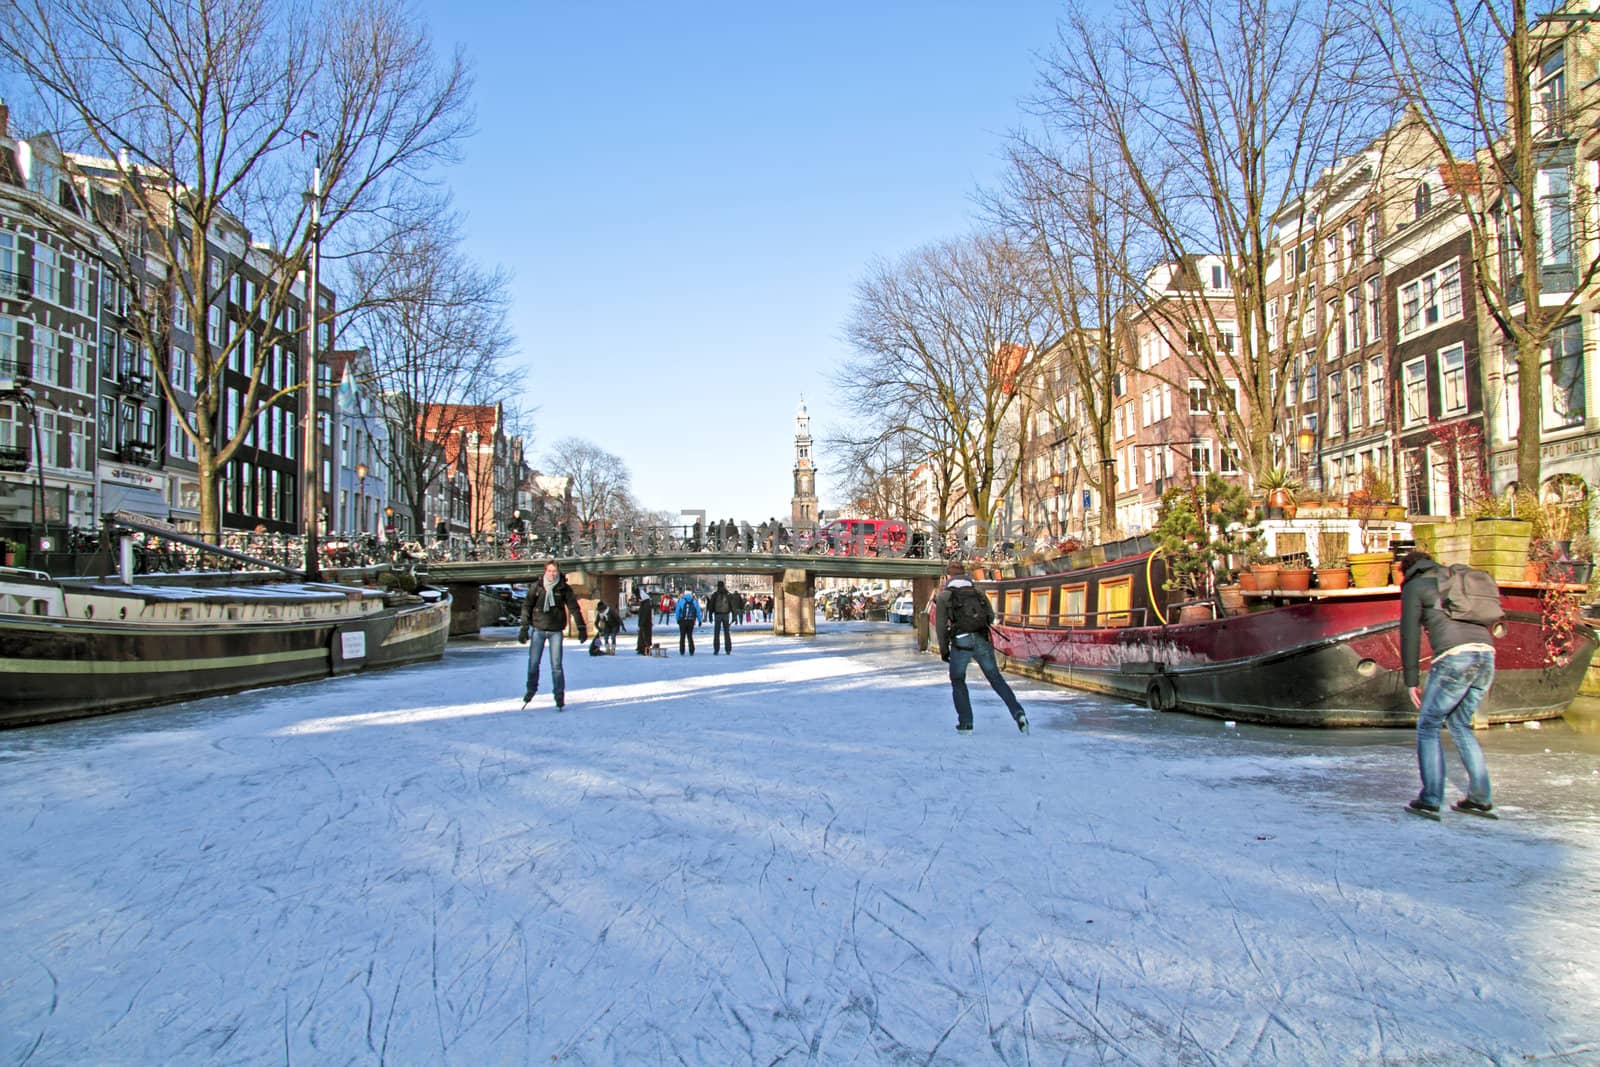 Ice skating on the canals in Amsterdam the Netherlands in winter by devy